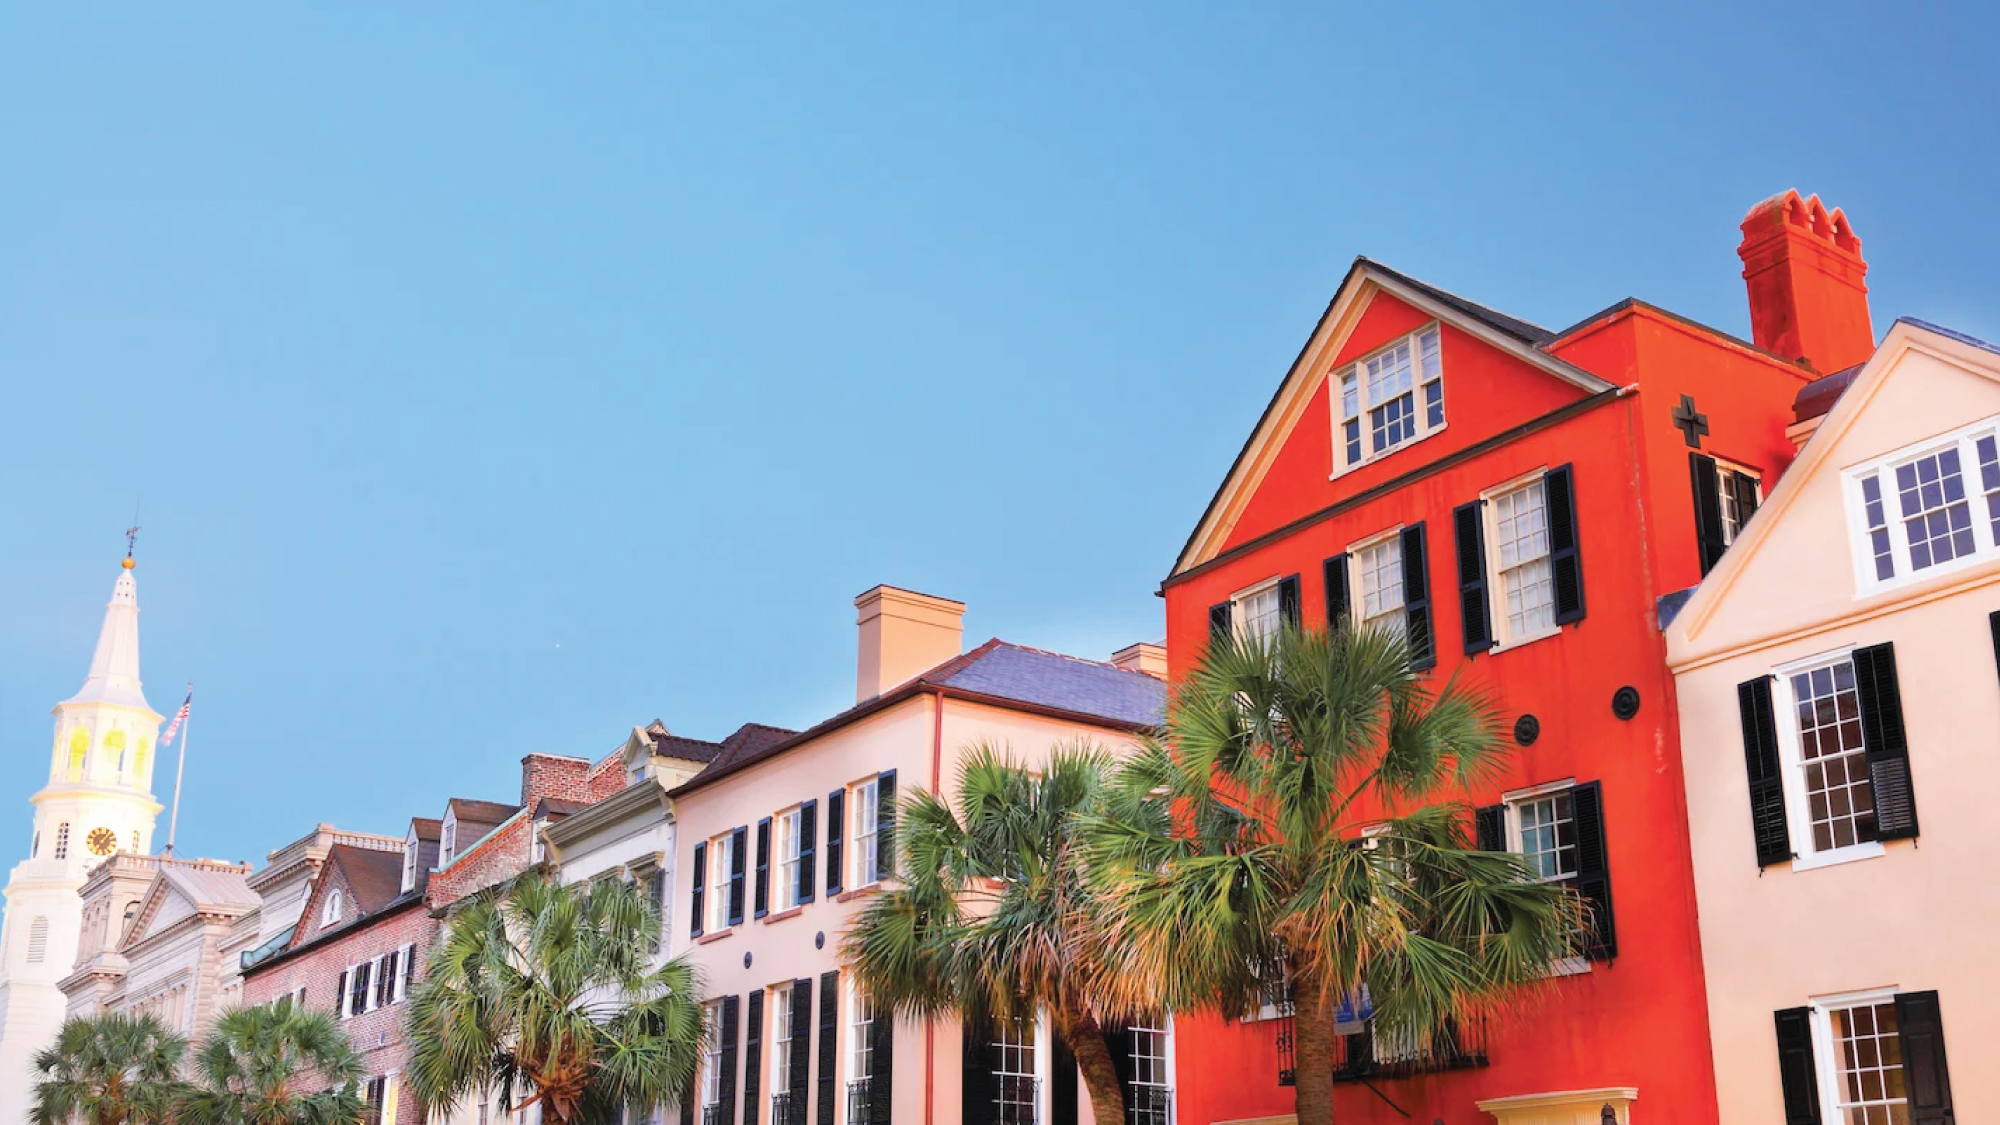 Charming streets lined with colorful historic homes.